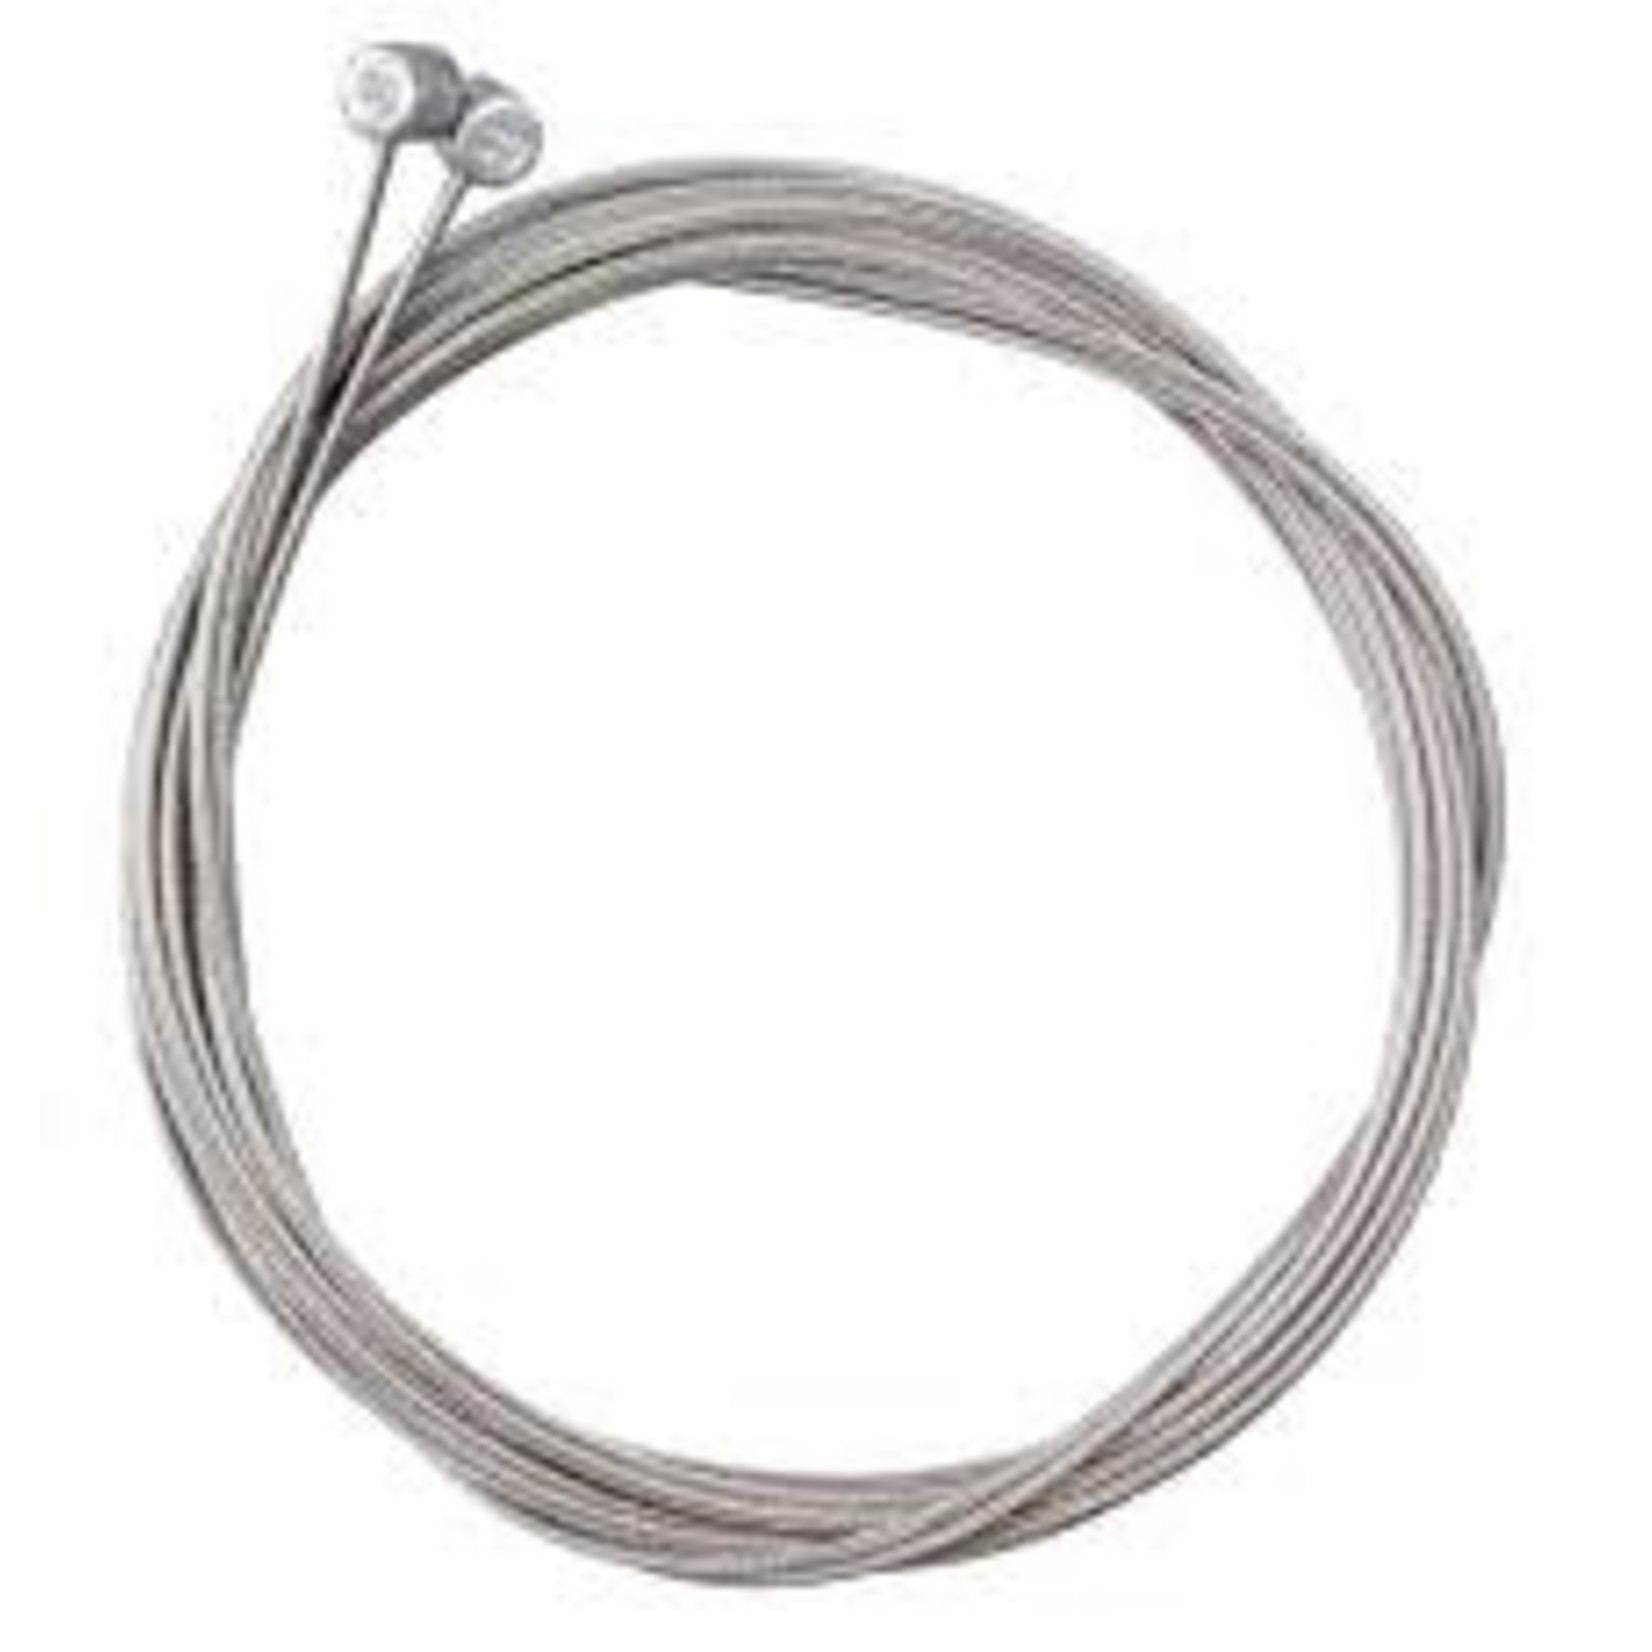 Jagwire, Slick, Brake cables, MTB, Stainless, 1700mm, single